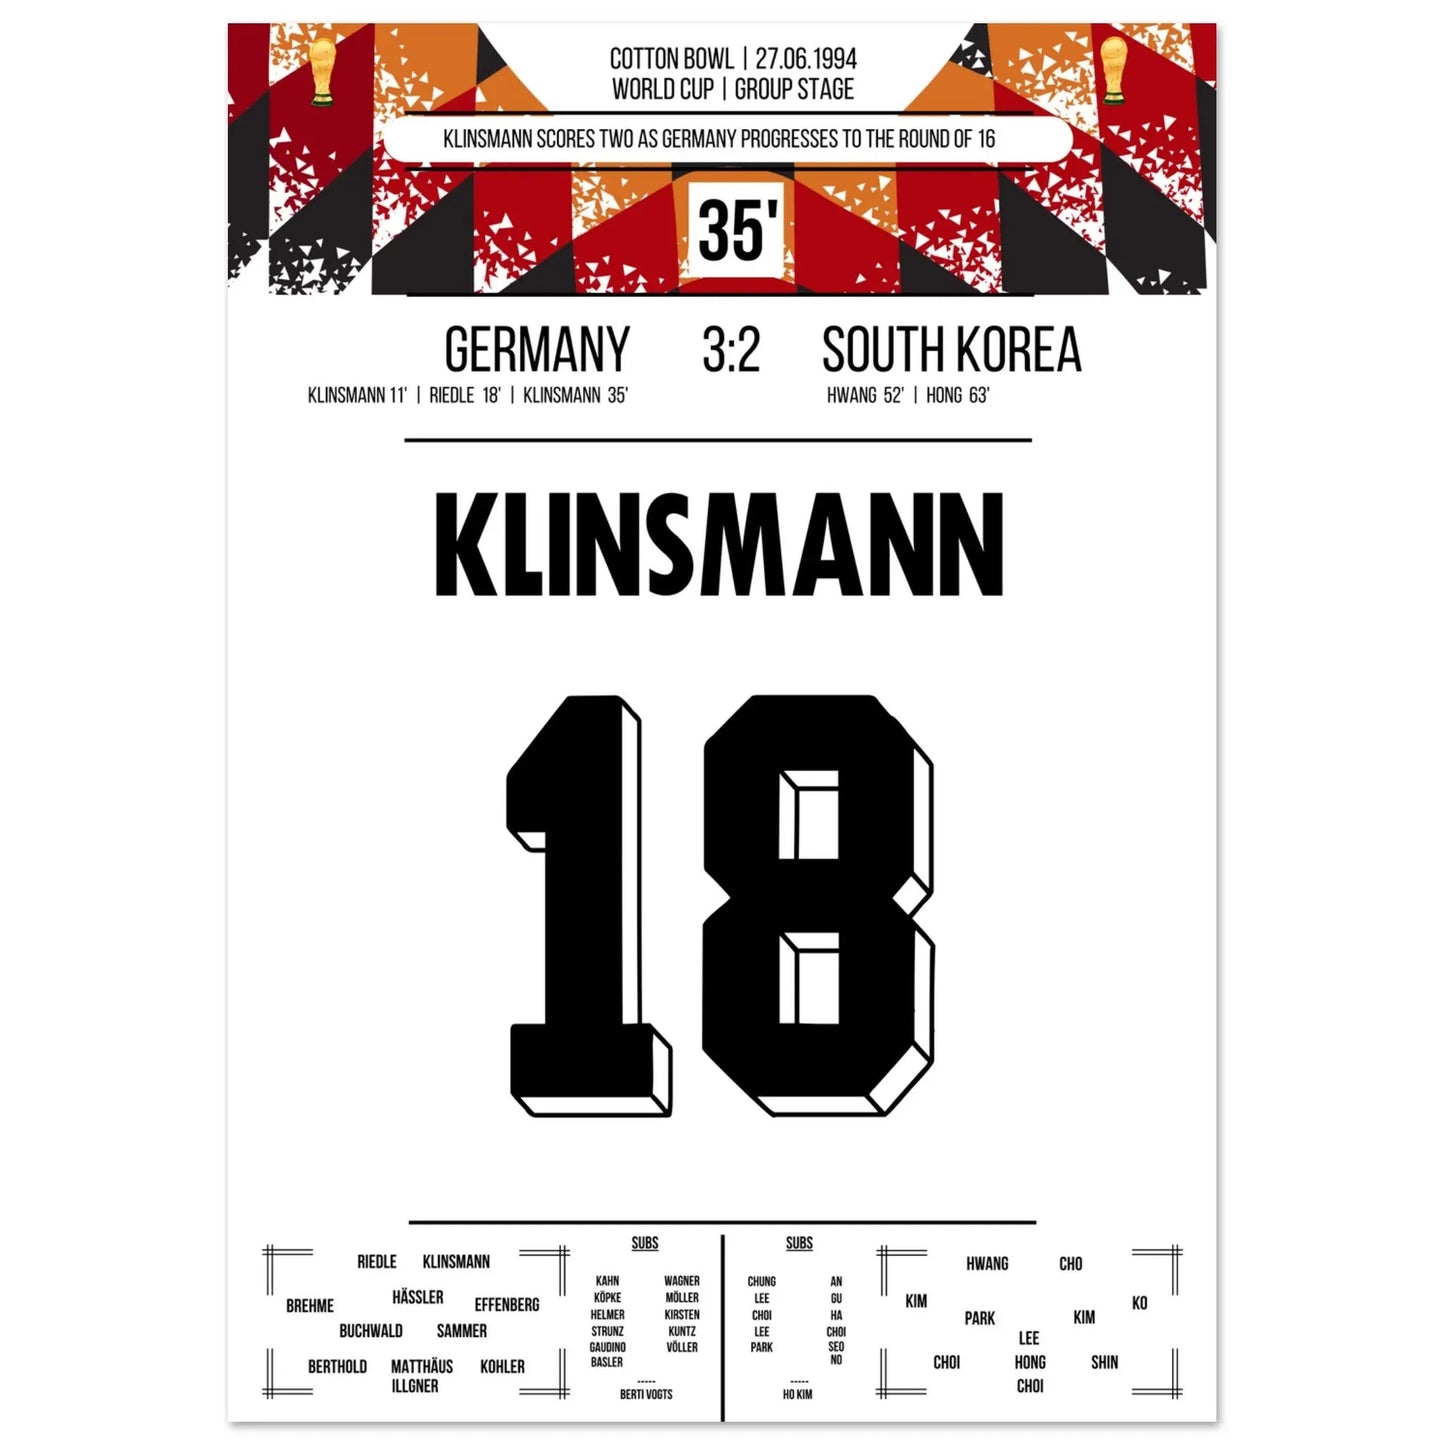 Klinsmann scores a brace to send Germany into the round of 16 at the 1994 World Cup